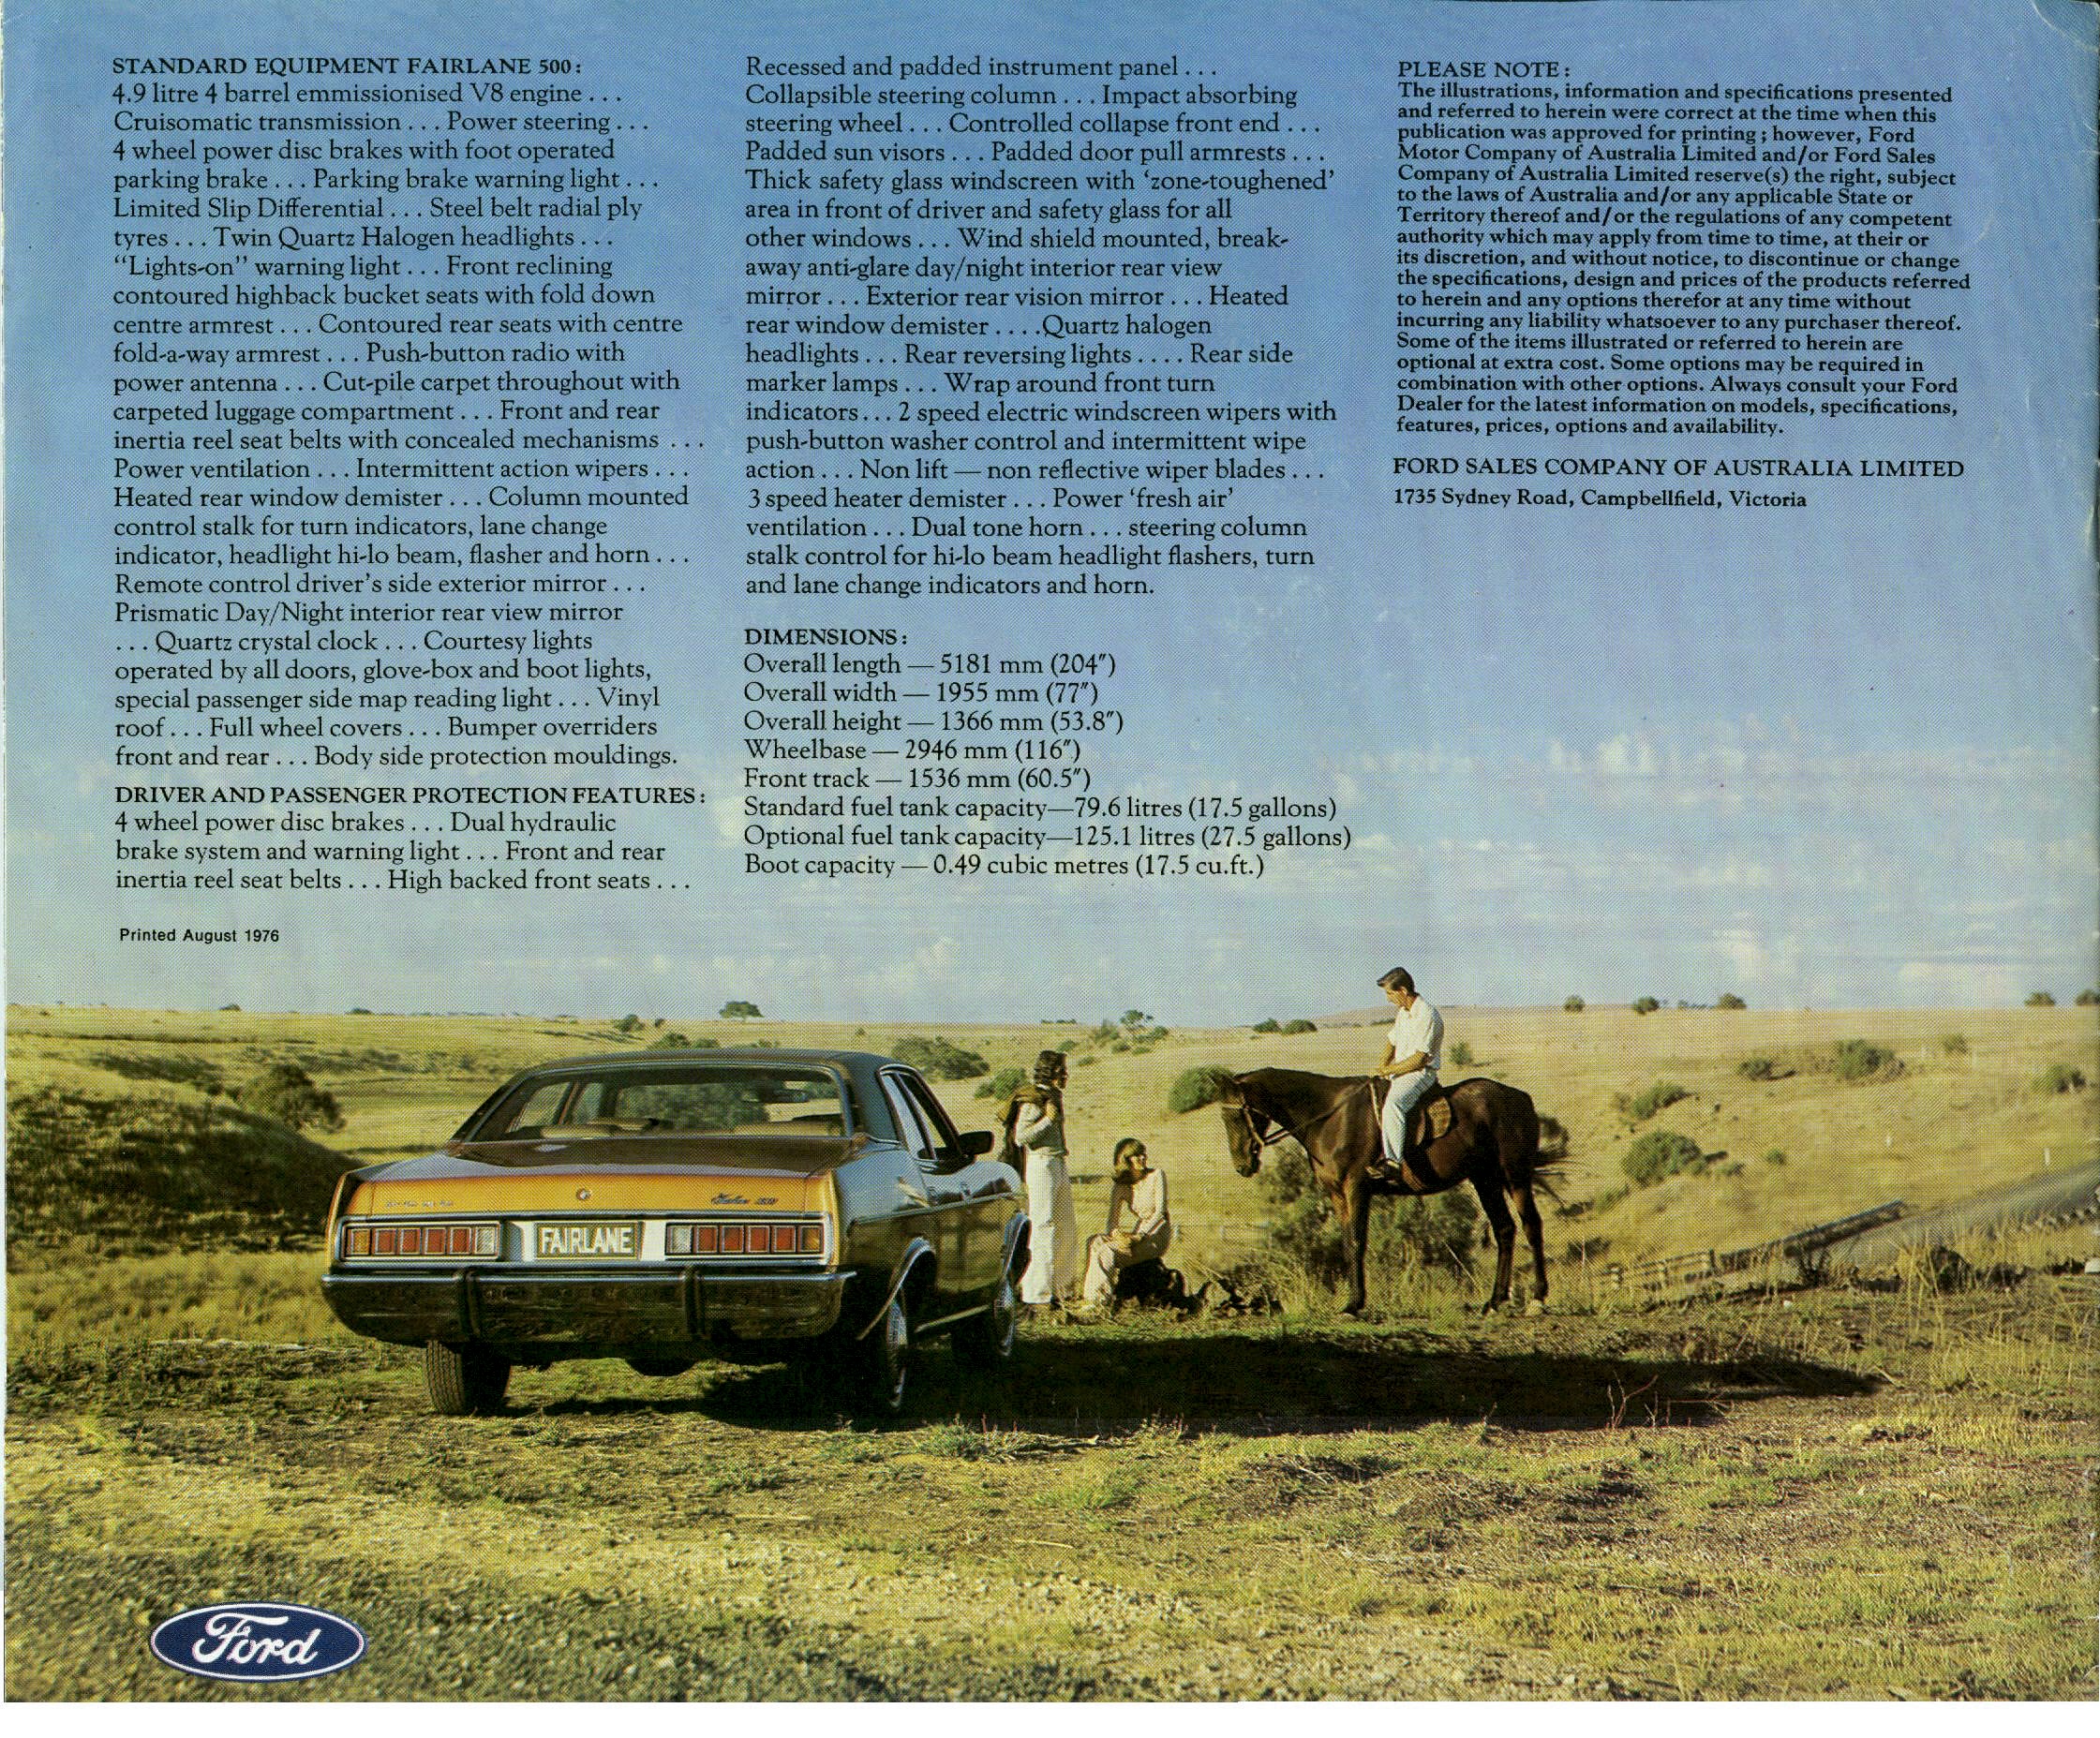 1976 Ford Fairlane Brochure Page 5